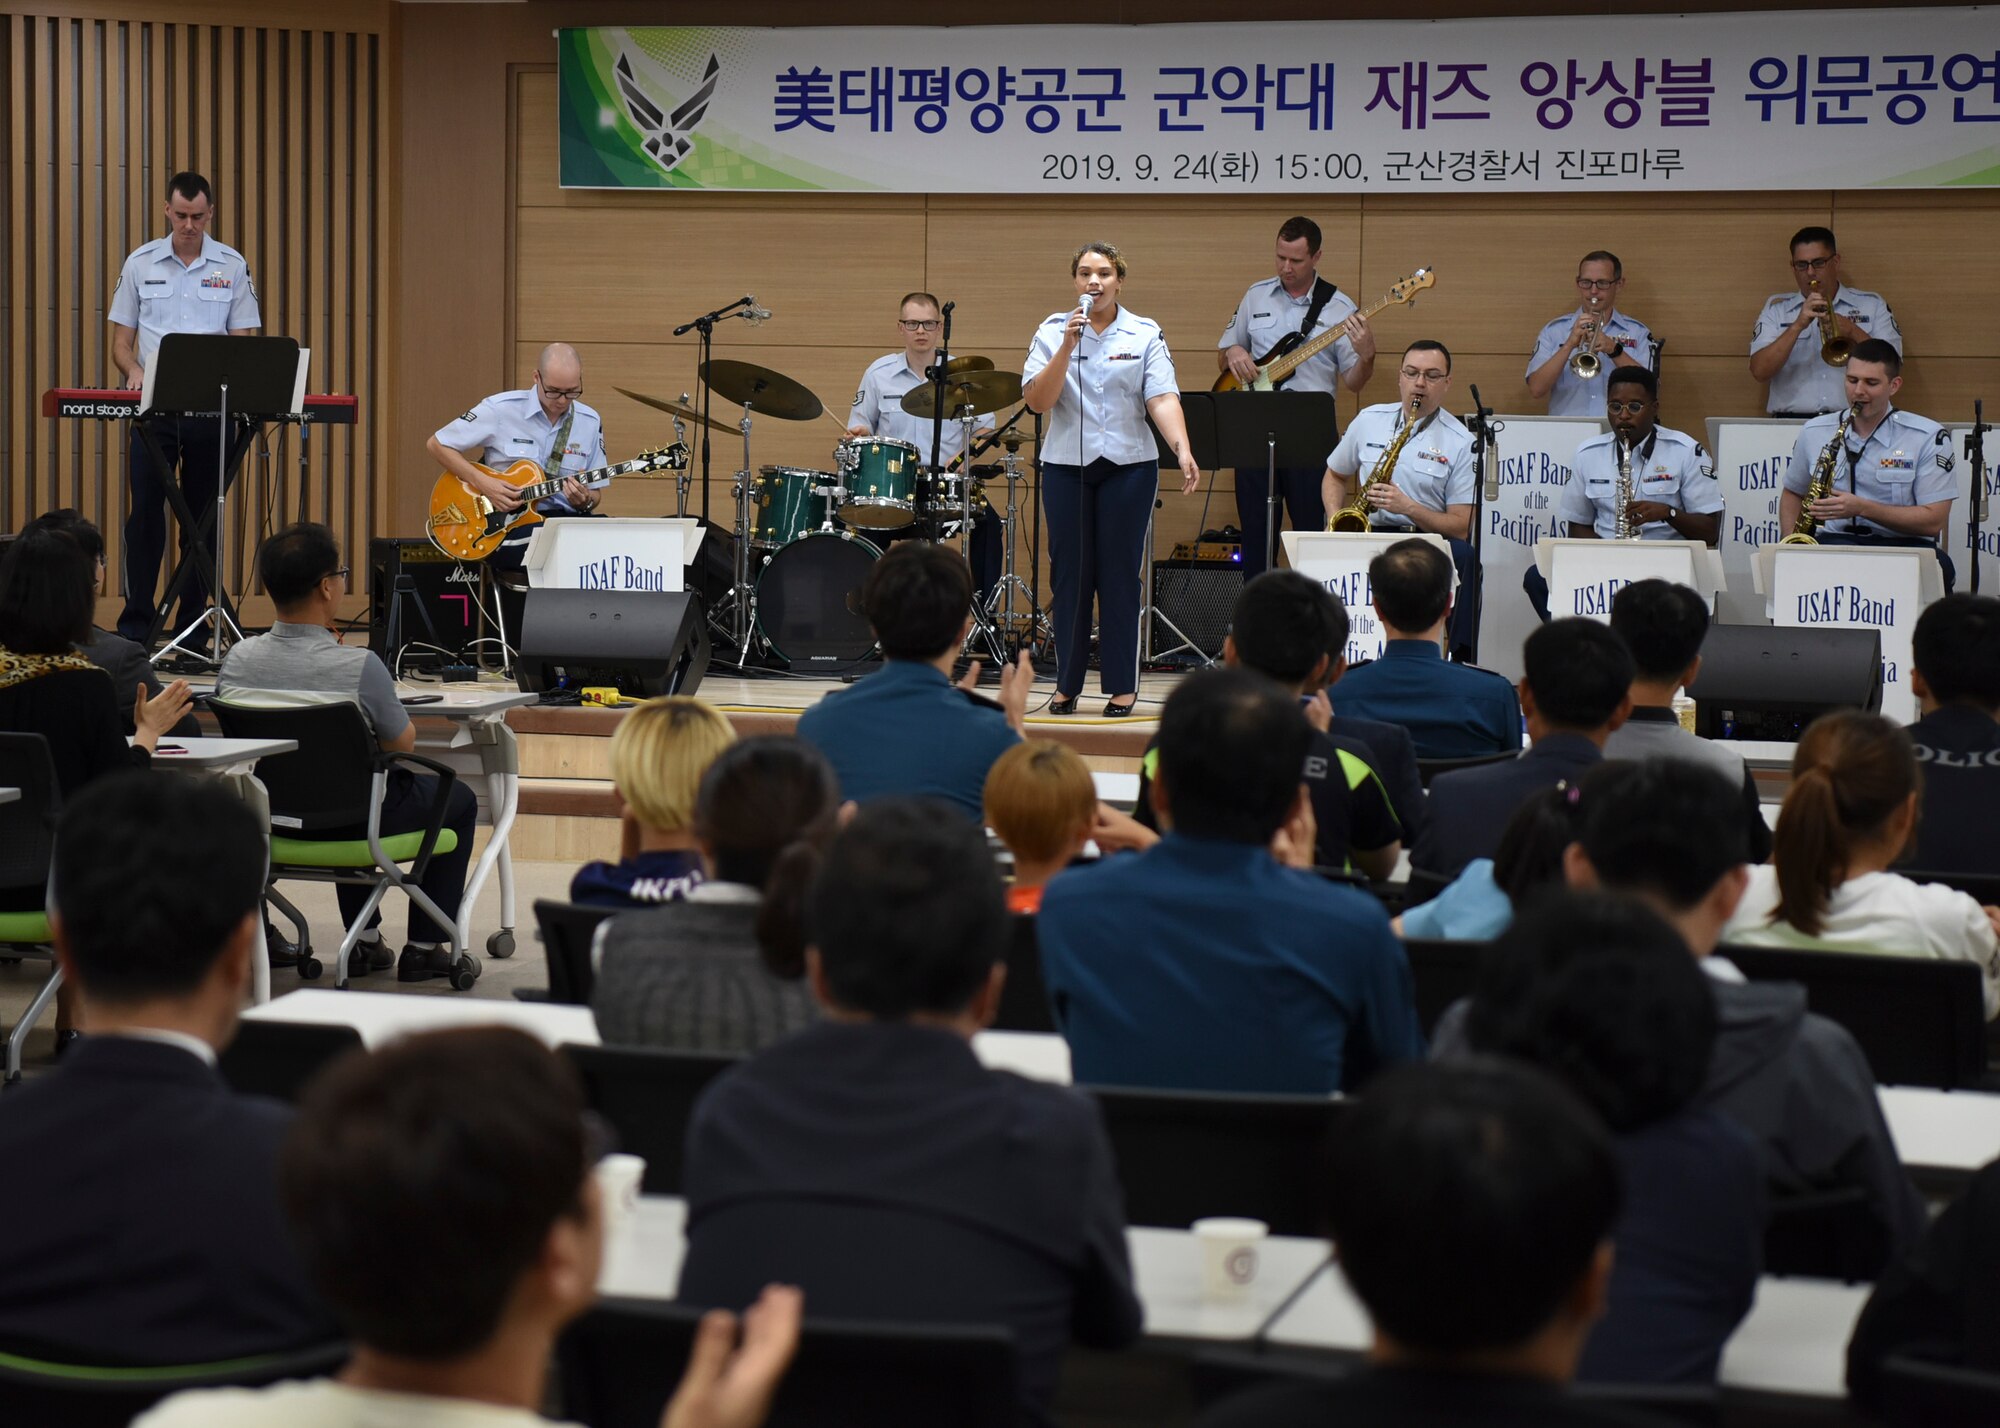 U.S. Air Force Band of the Pacific members play for the Gunsan Korean National Police in Gunsan City, Republic of Korea, Sept. 24, 2019. The Pacific Showcase jazz ensemble consists of multiple instruments including saxophone, trumpet, drums and guitar. (U.S. Air Force photo by Staff Sgt. Anthony Hetlage)